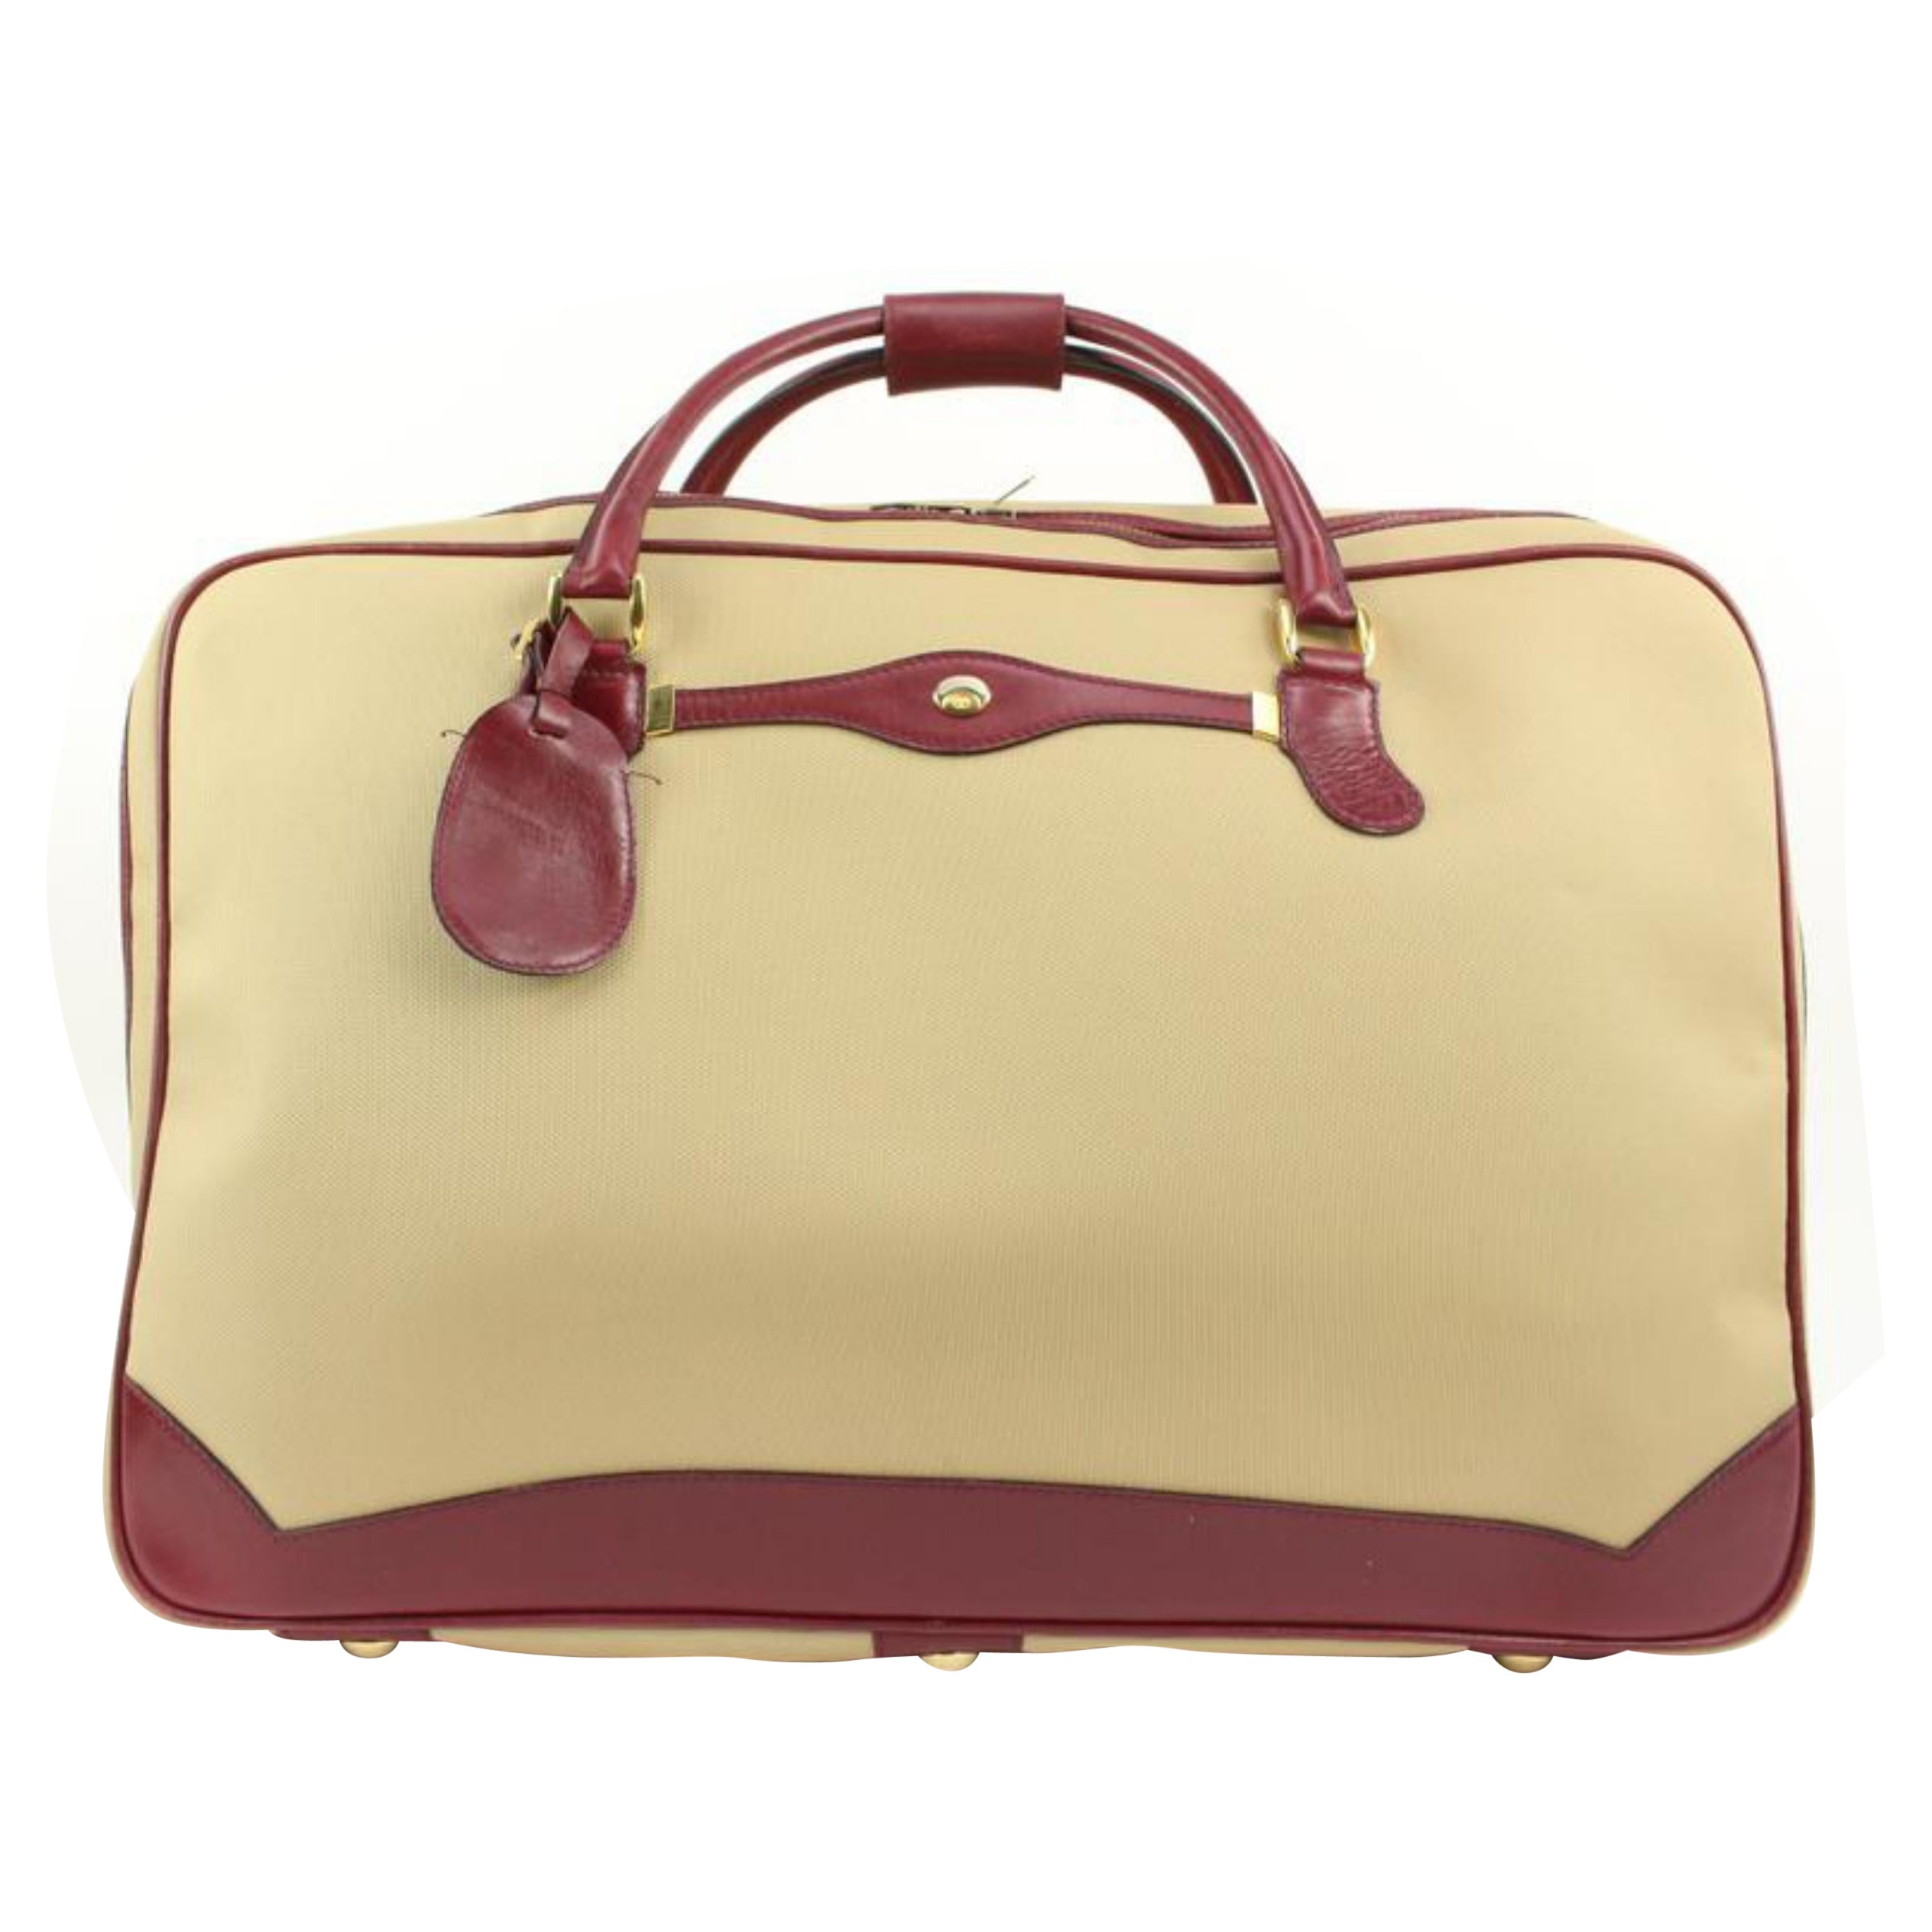 Gucci Large Beige x Burgundy Suitcase Luggage 63g218s